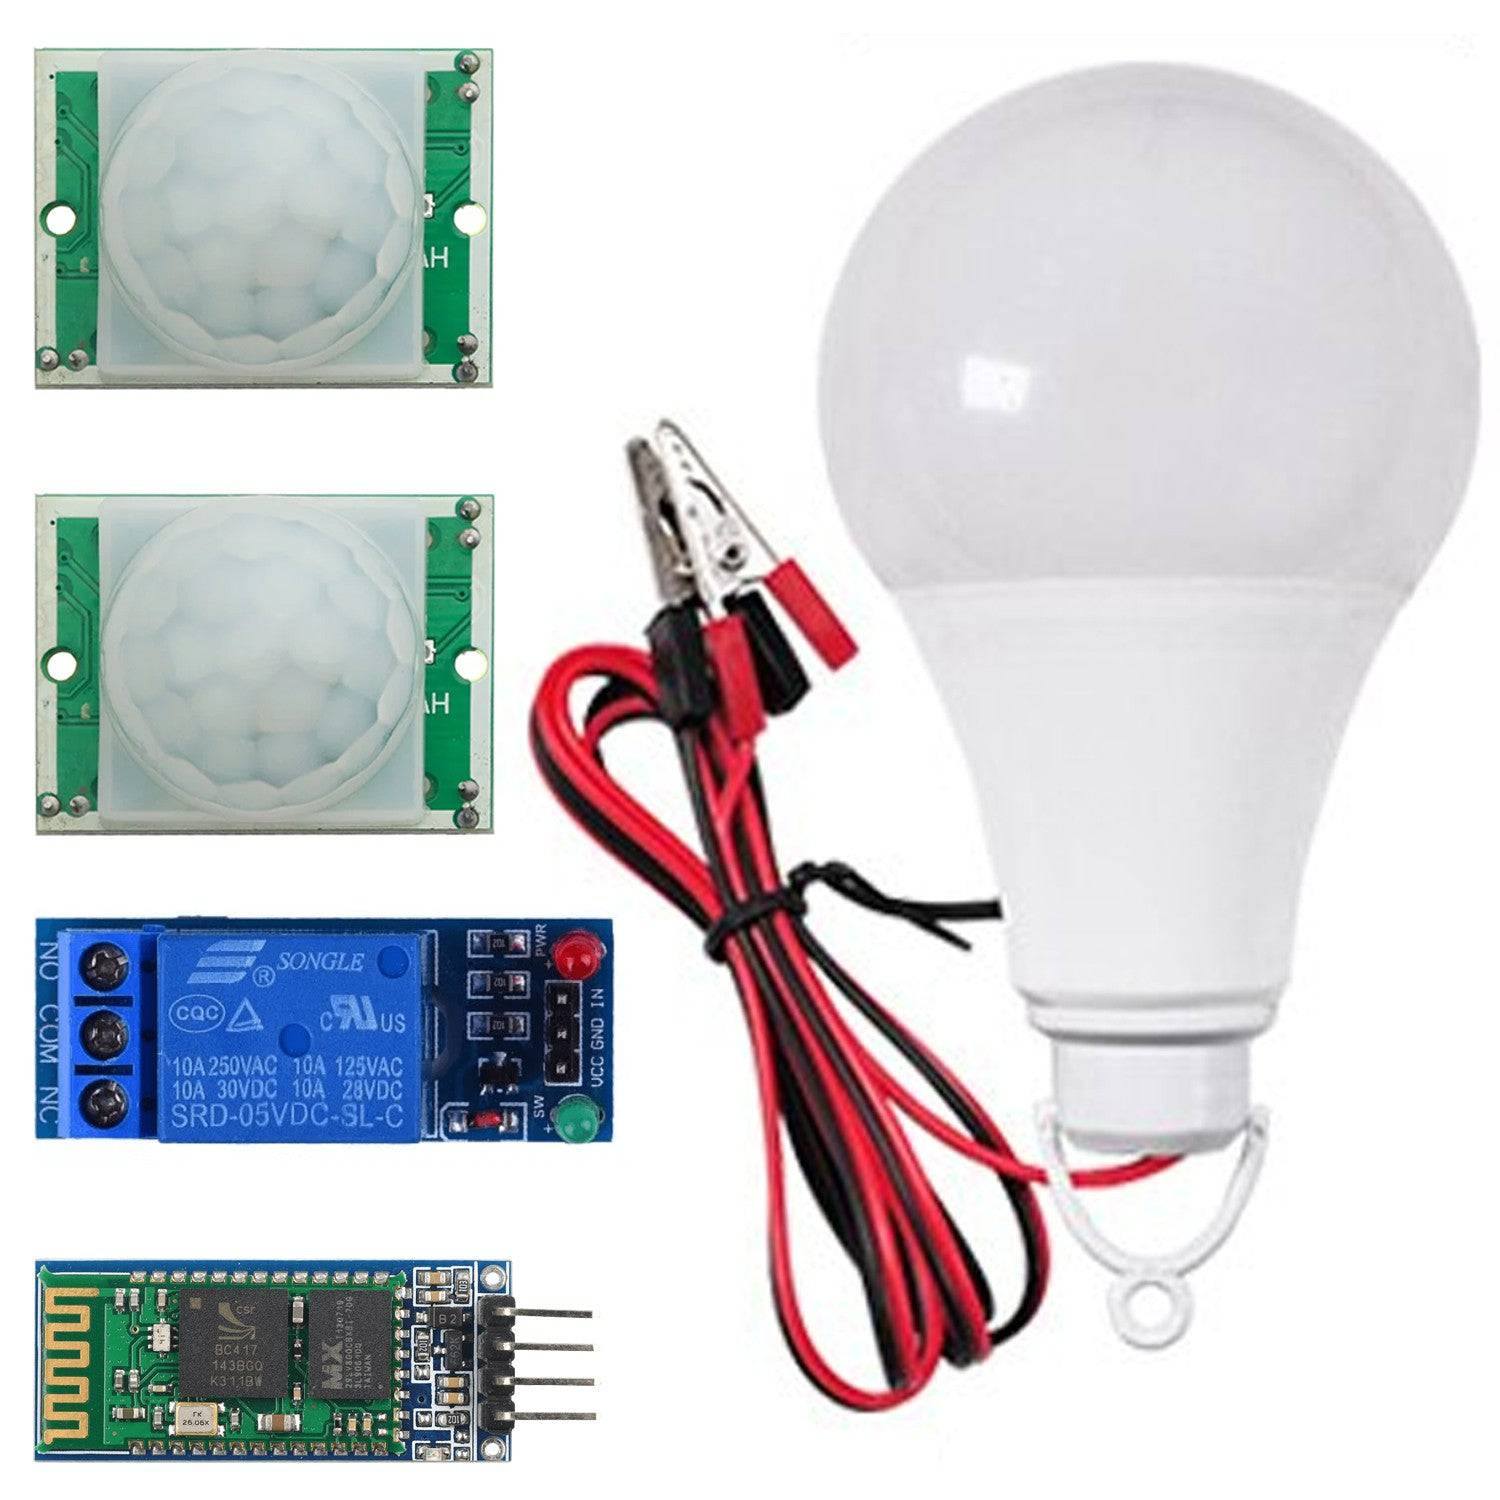 PIR Motion Sensor, Relay Module, Bluetooth Module and 9 or 12V Bulb with Clips- KT1340 - REES52